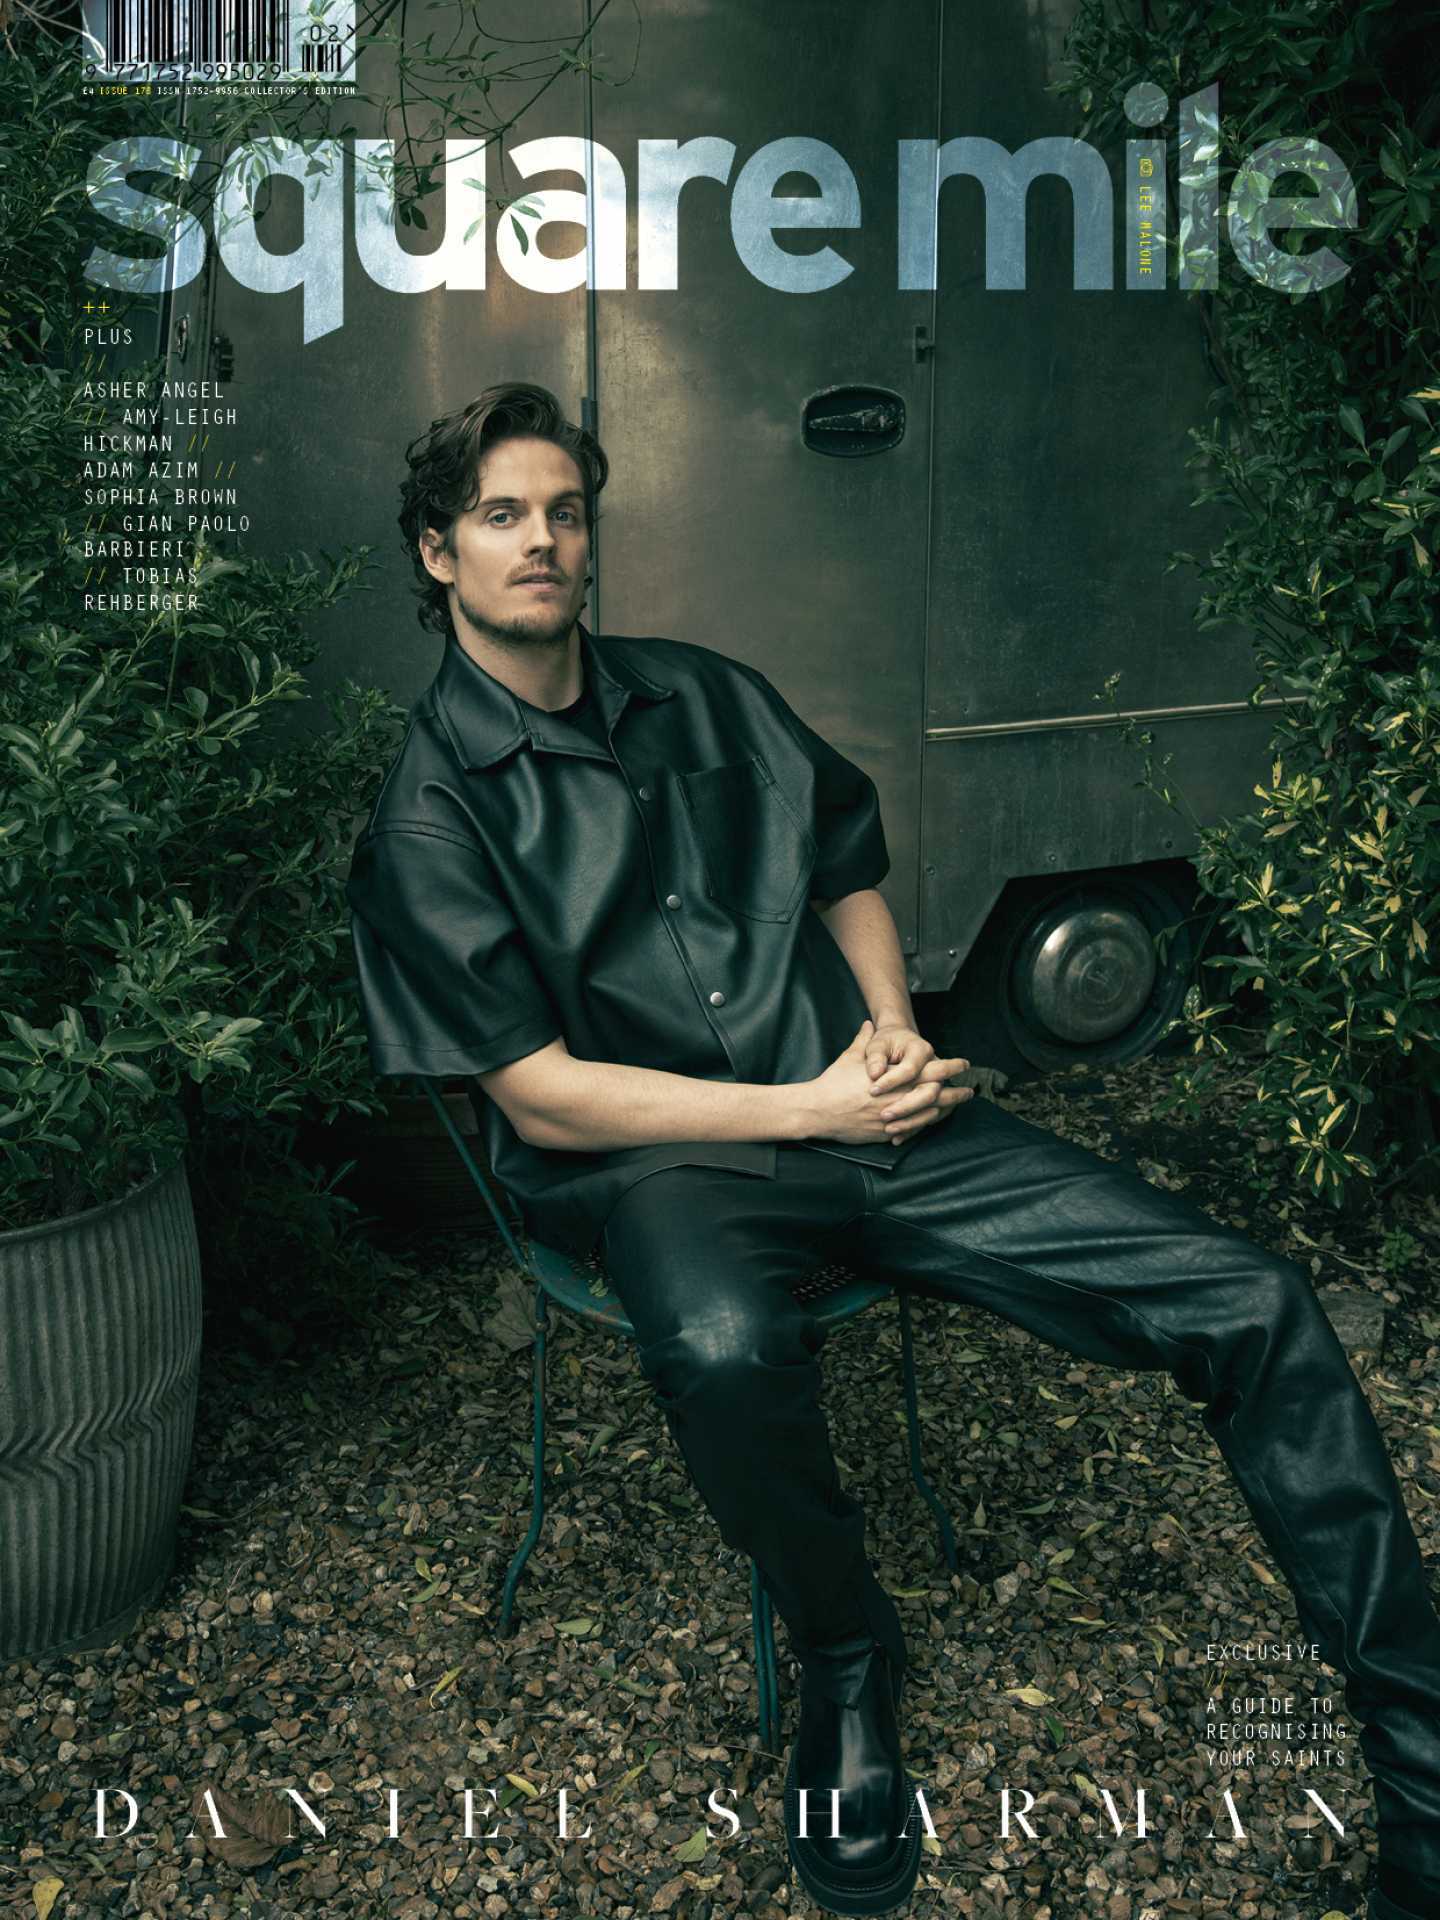 Daniel Sharman photographed by Lee Malone for Square Mile